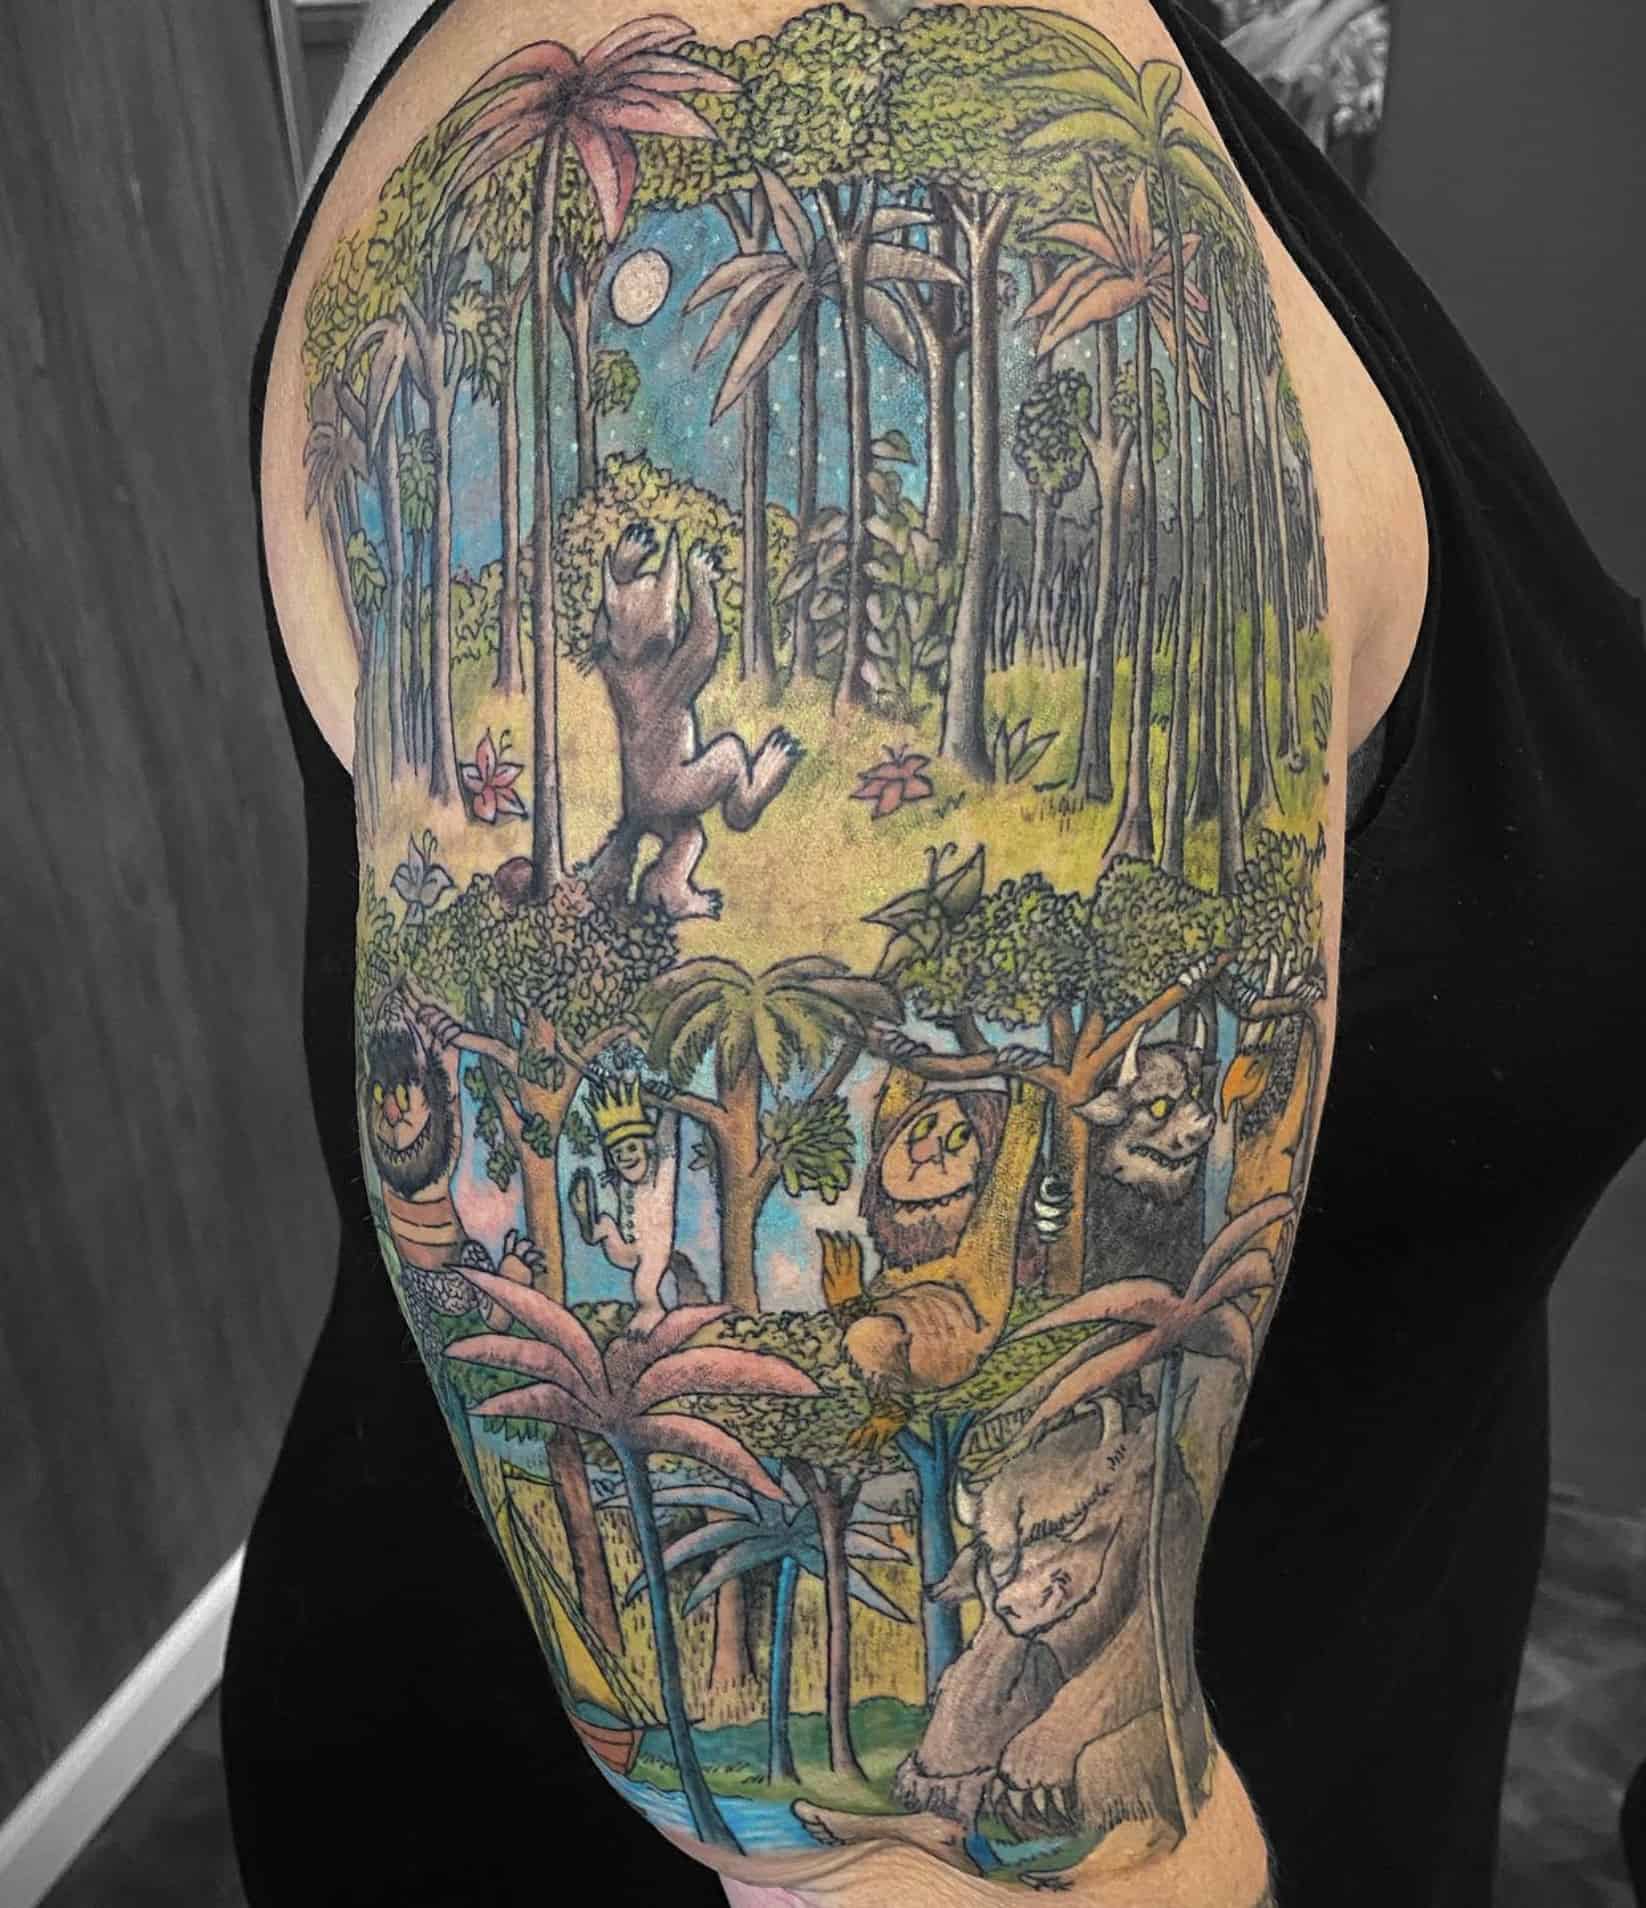 Where the wild things are tattoo